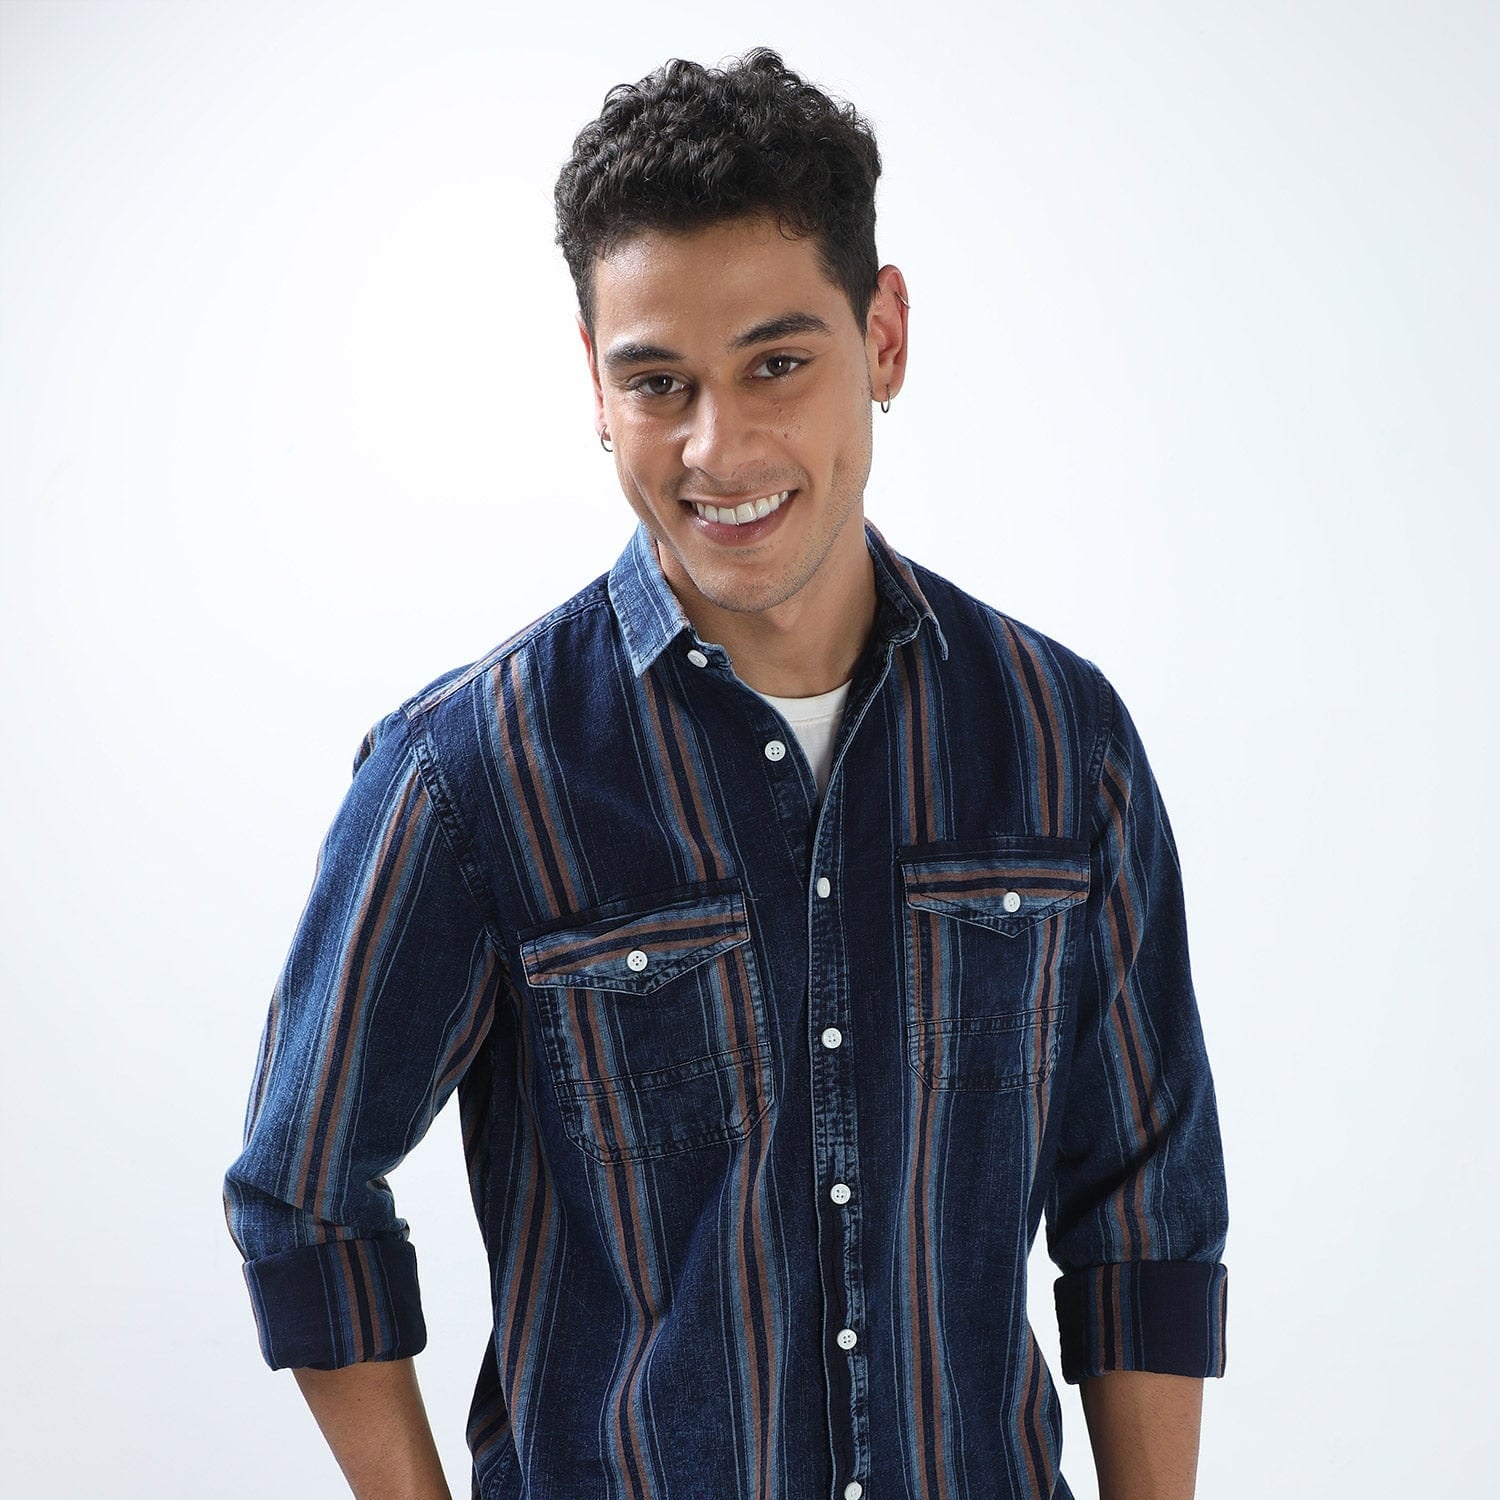 Buy Stylish Navy Blue Striped Shirt for Men OnlineRs. 1549.00